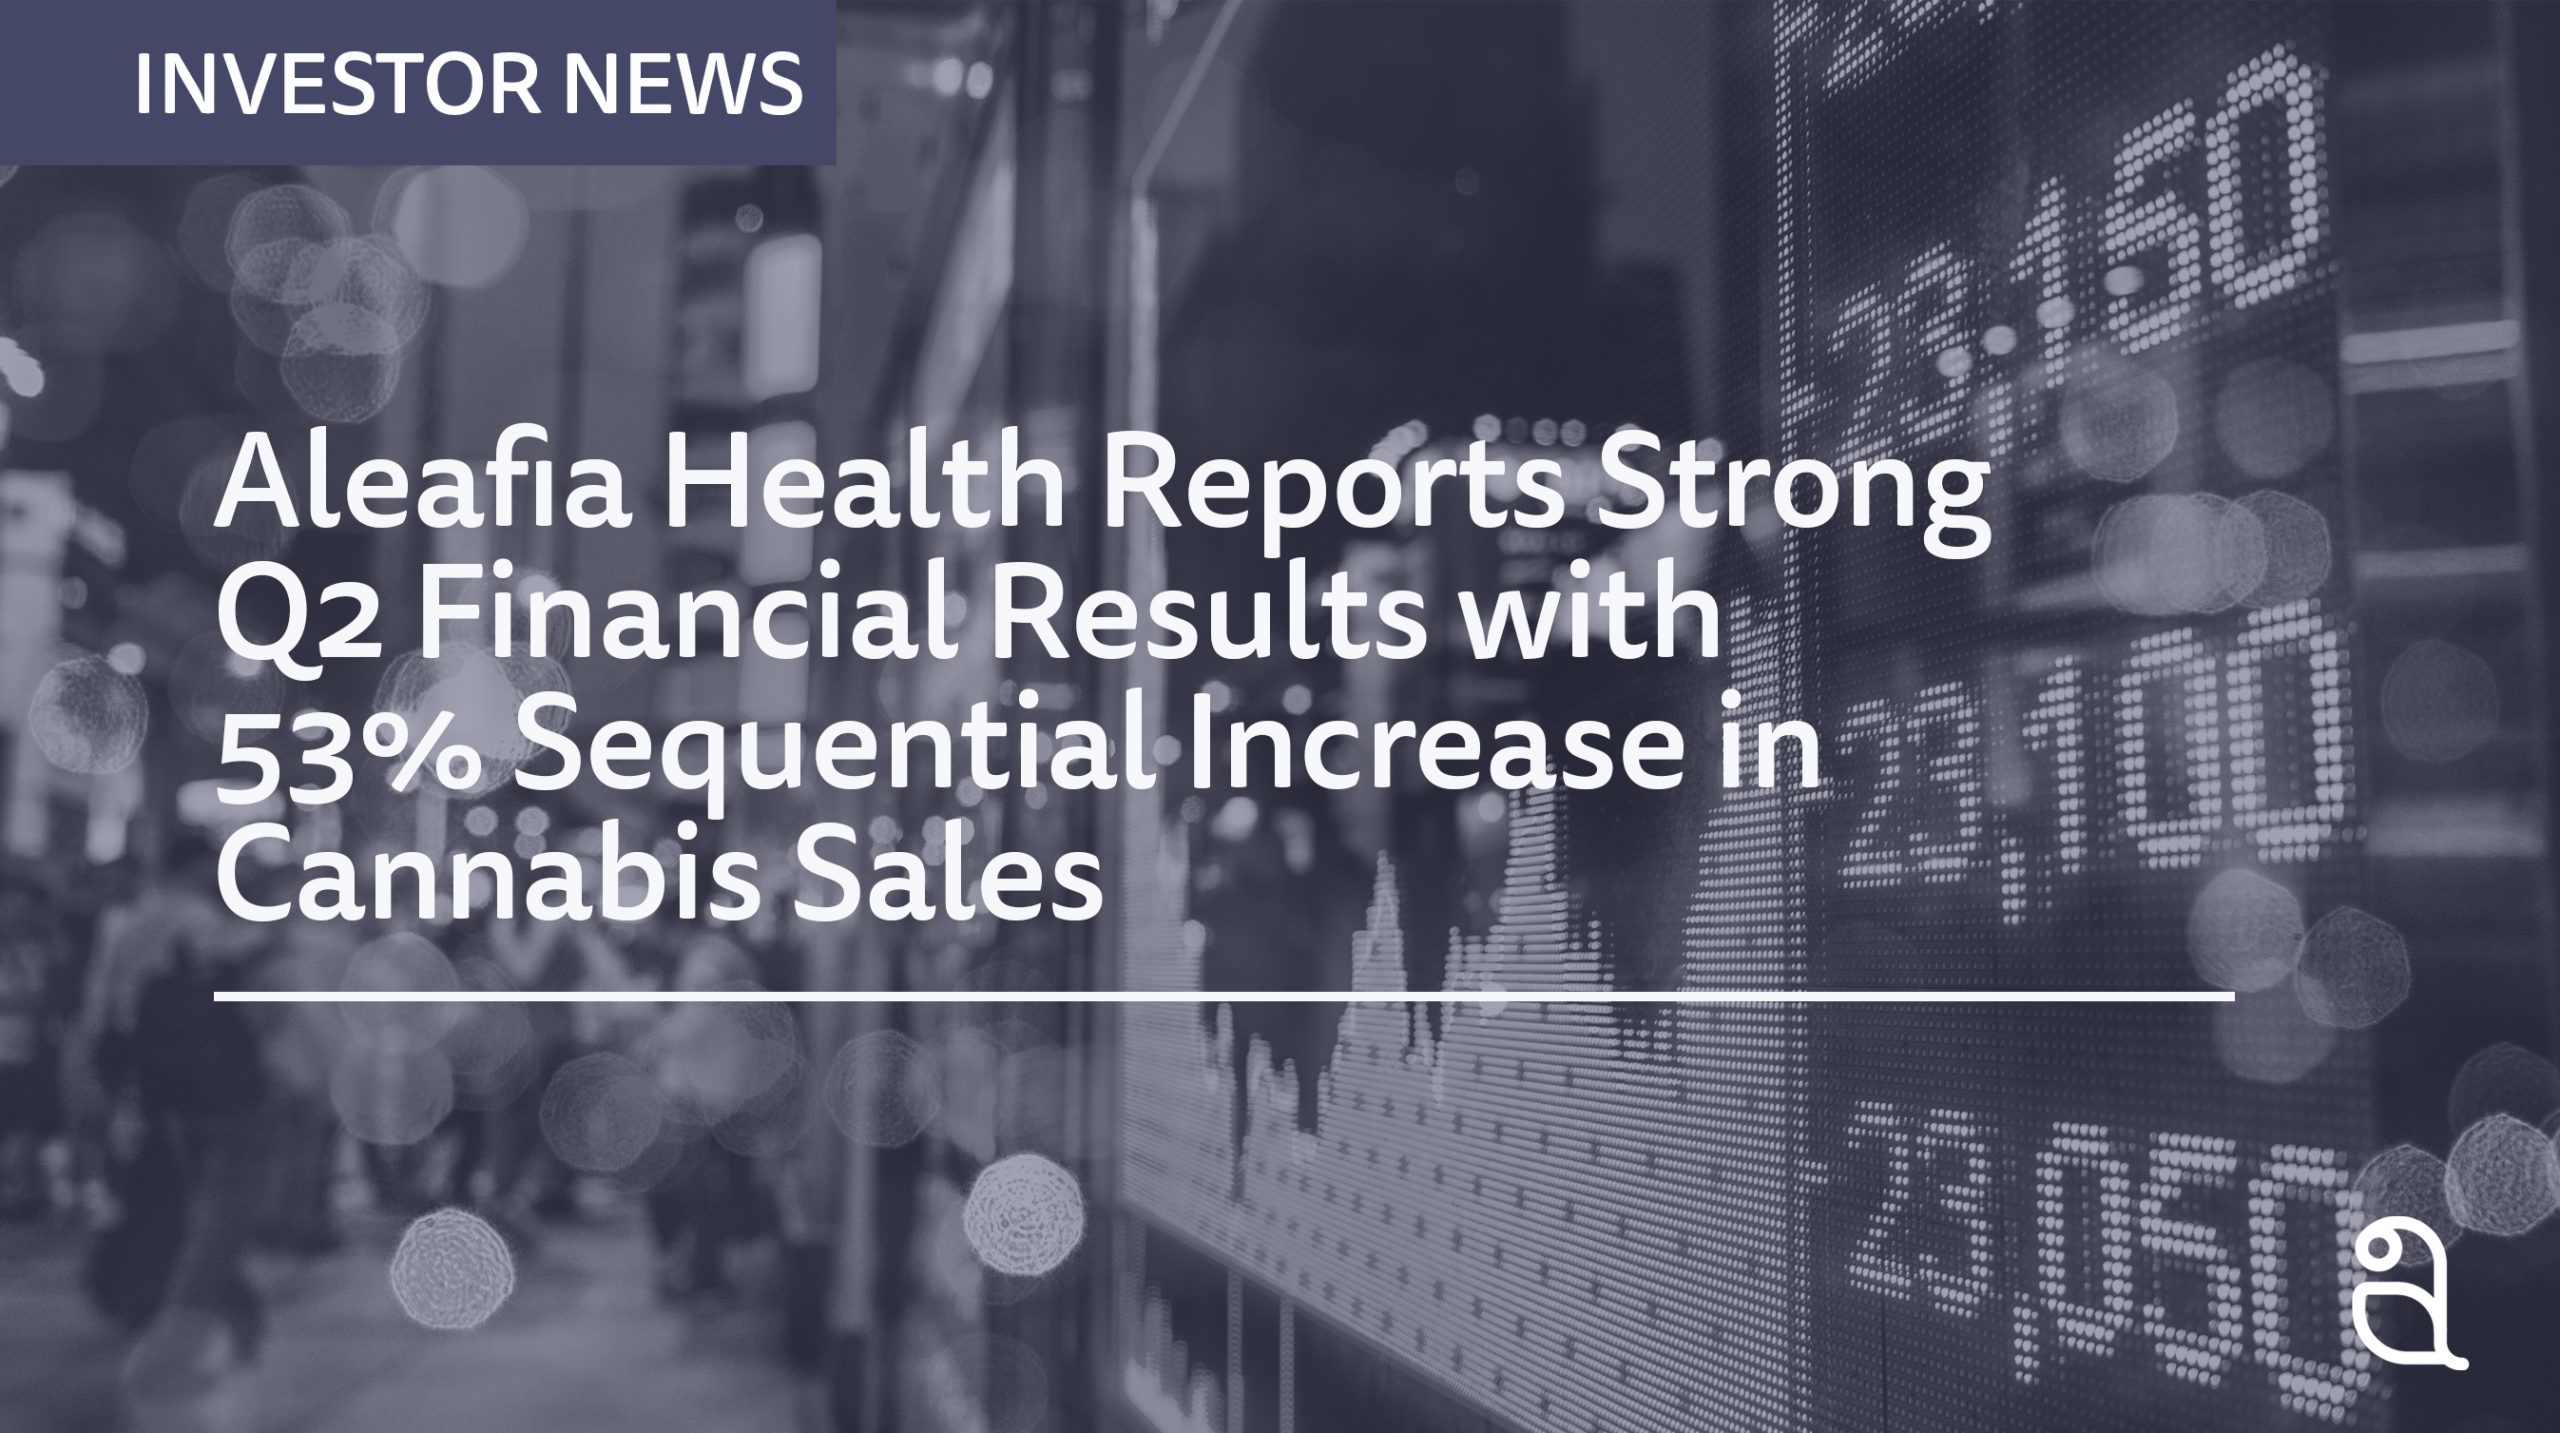 Aleafia Health Reports Strong 2021 Second Quarter Financial Results with 53% Sequential Increase in Cannabis Net Revenue